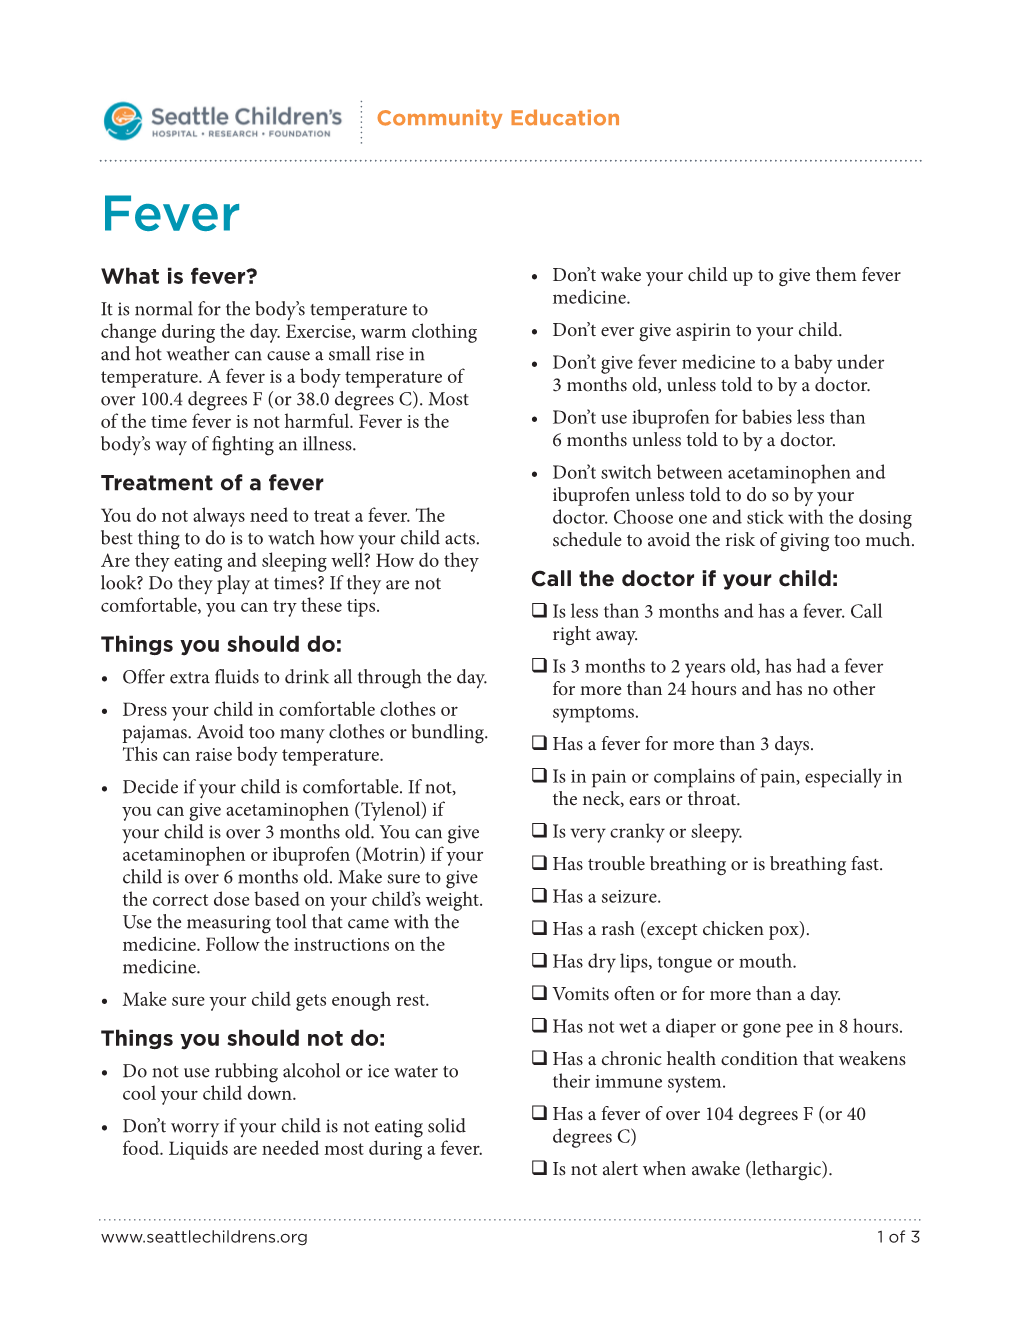 Treatment of a Fever Things You Should Do